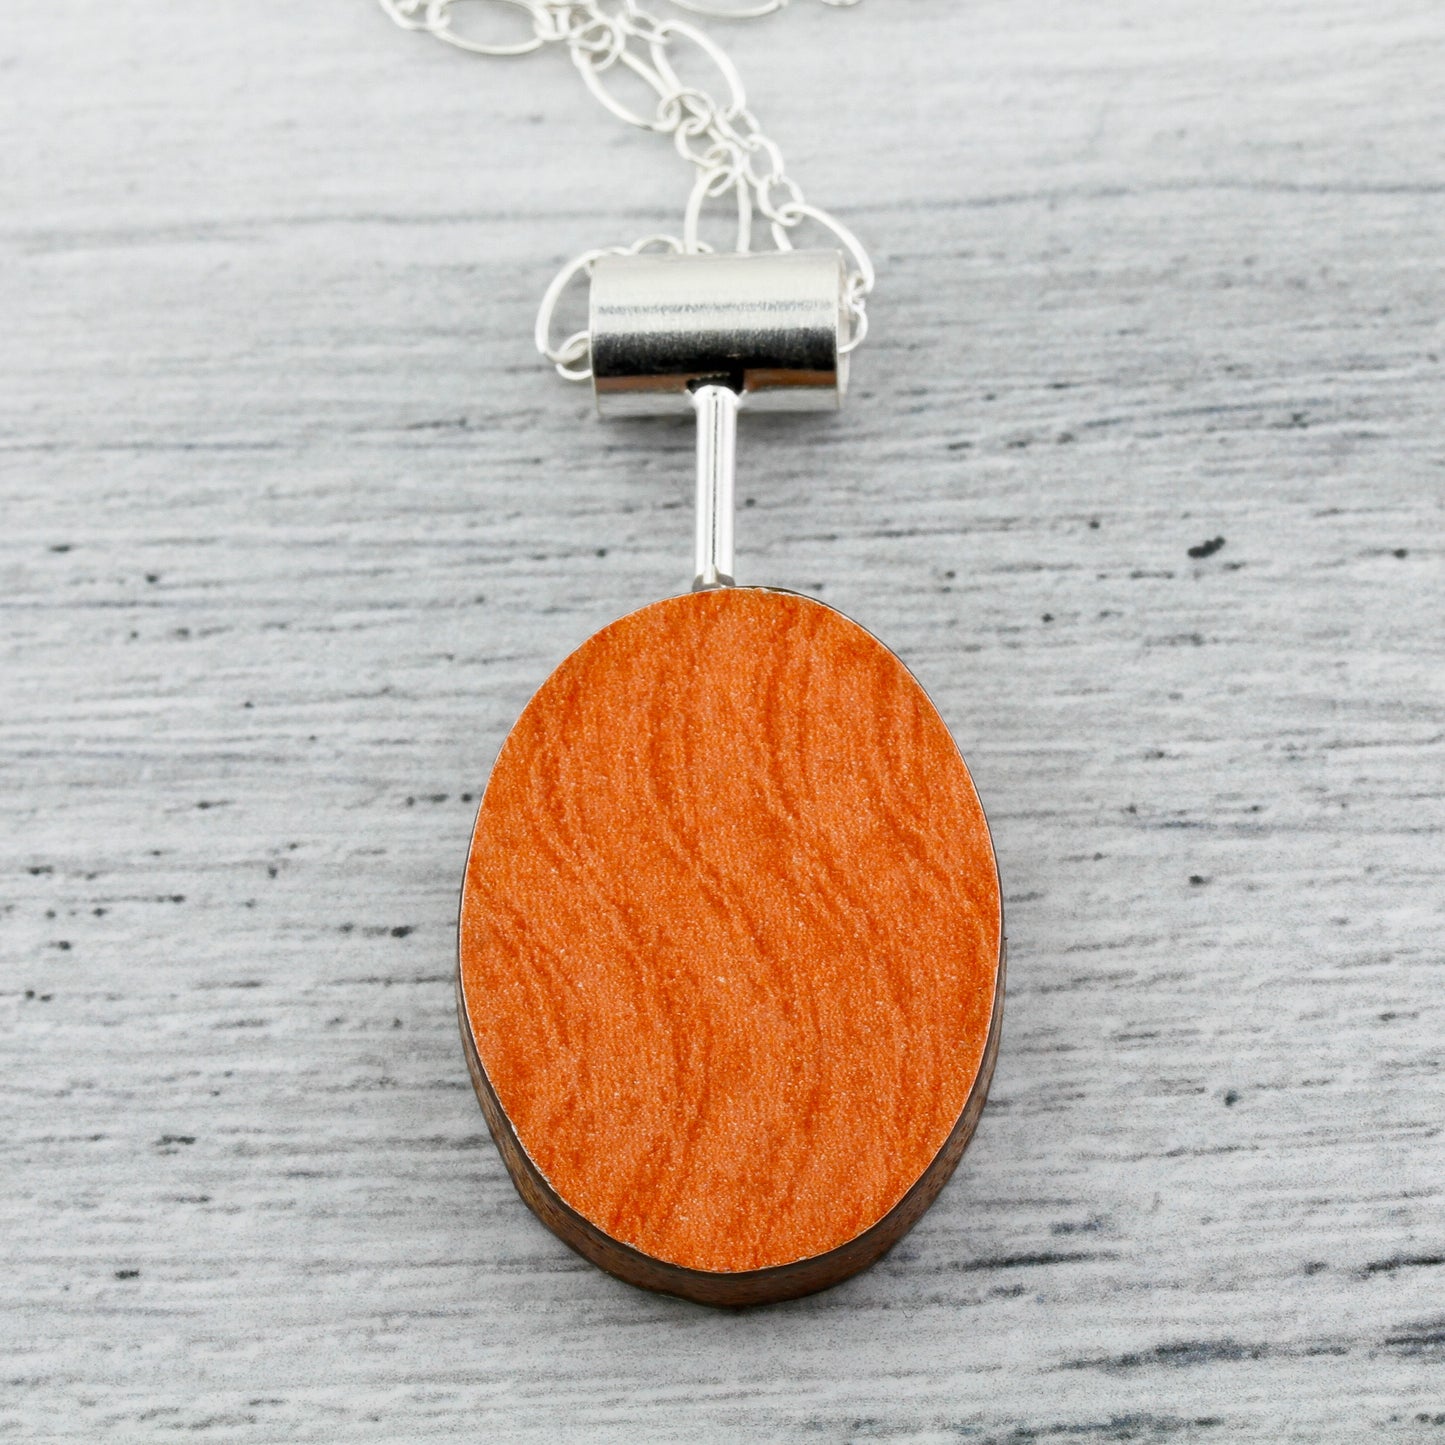 Orange side of oval shaped contemporary art jewelry with laminate on wood